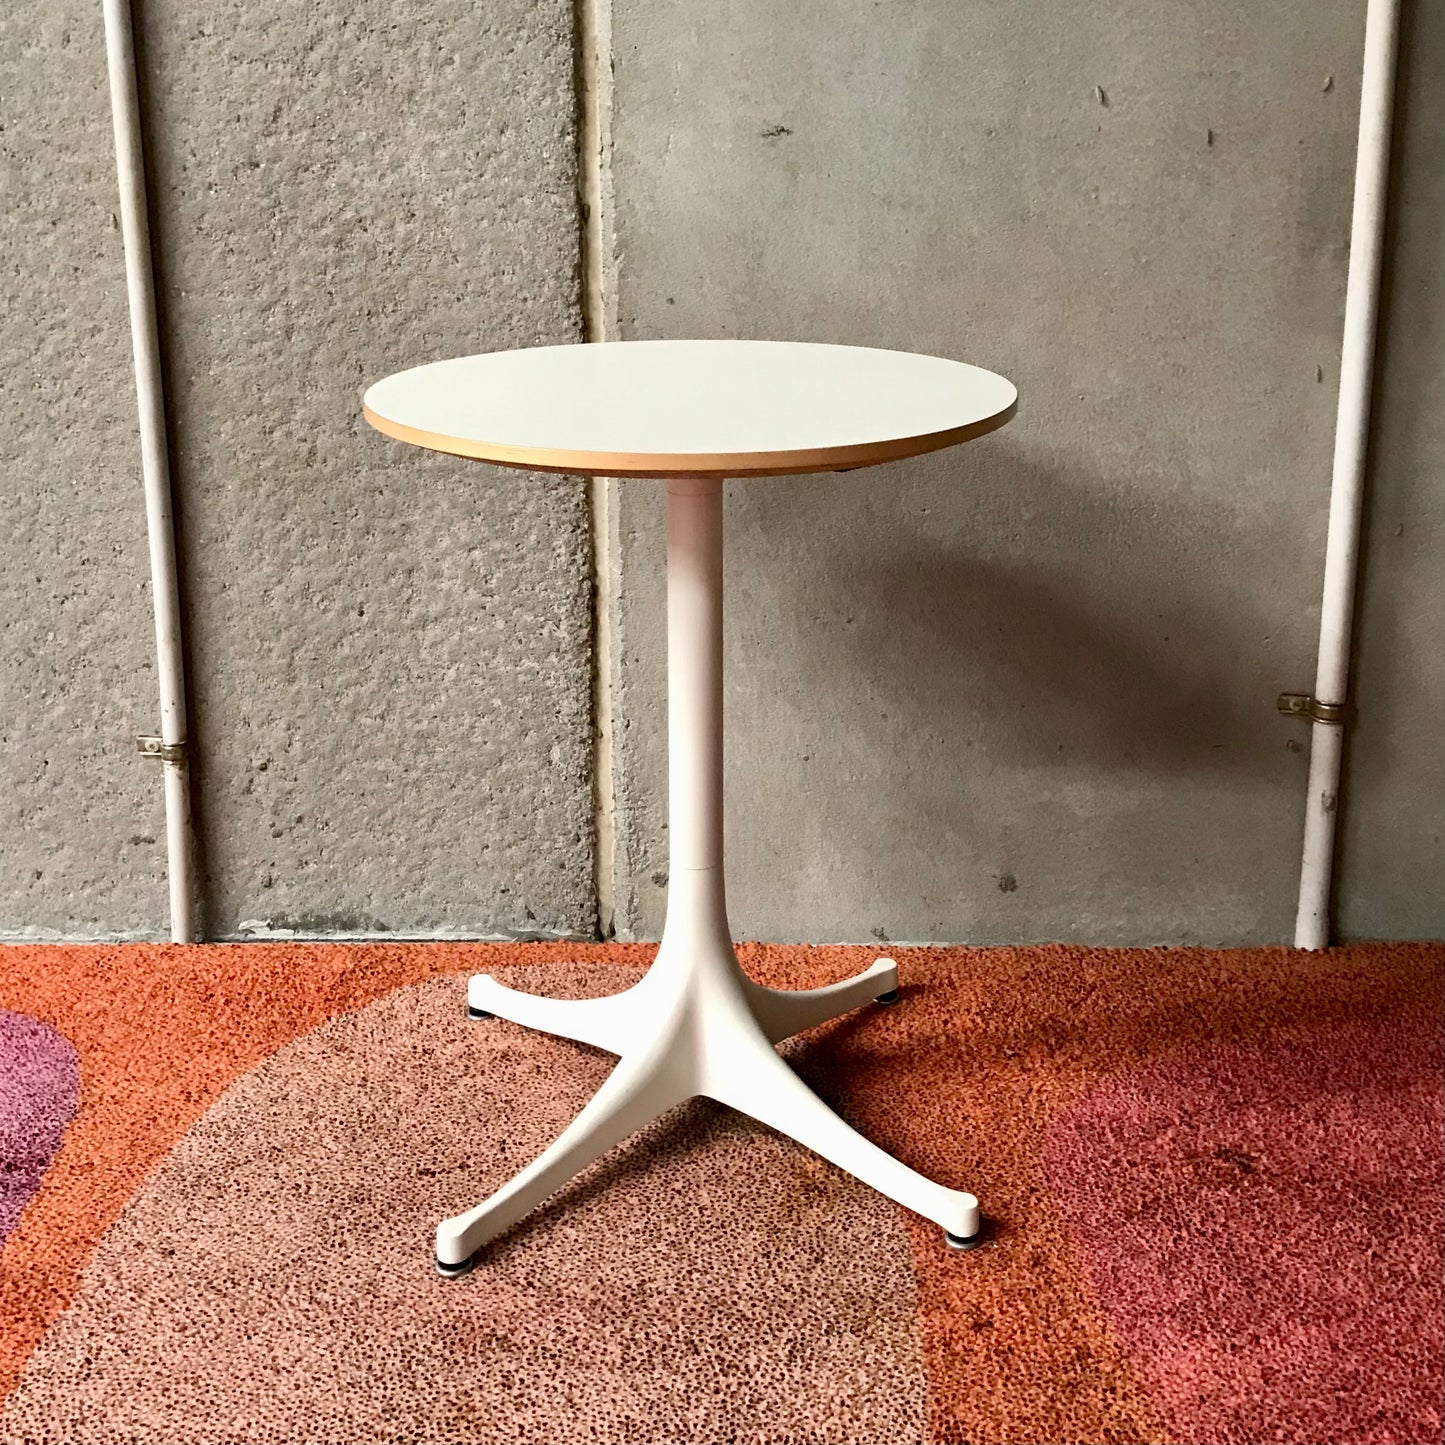 Nelson Pedestal Table by George Nelson for Herman Miller